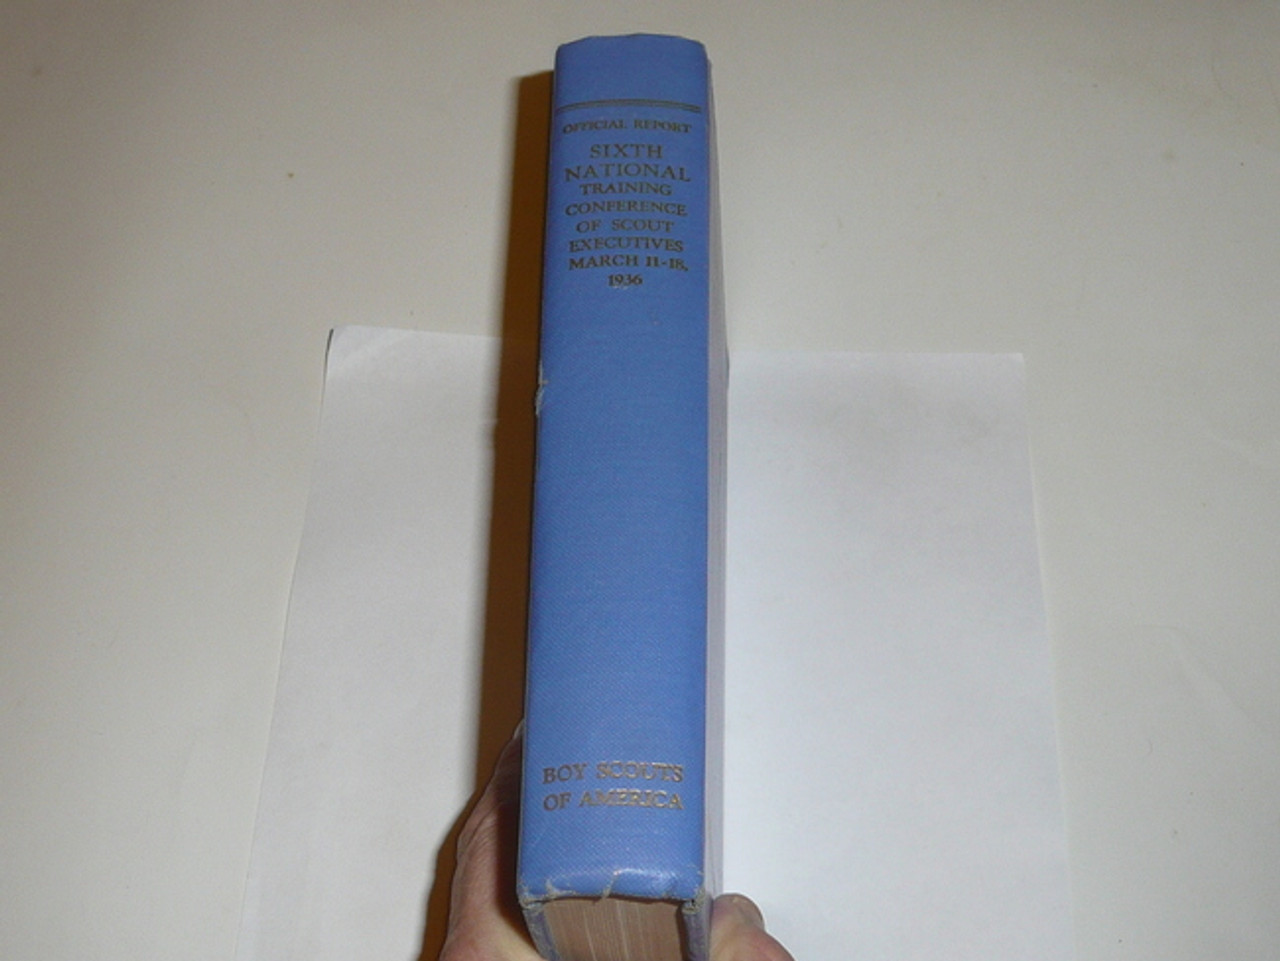 1936 Sixth National Training Conference of Scout Executives Hardbound Book